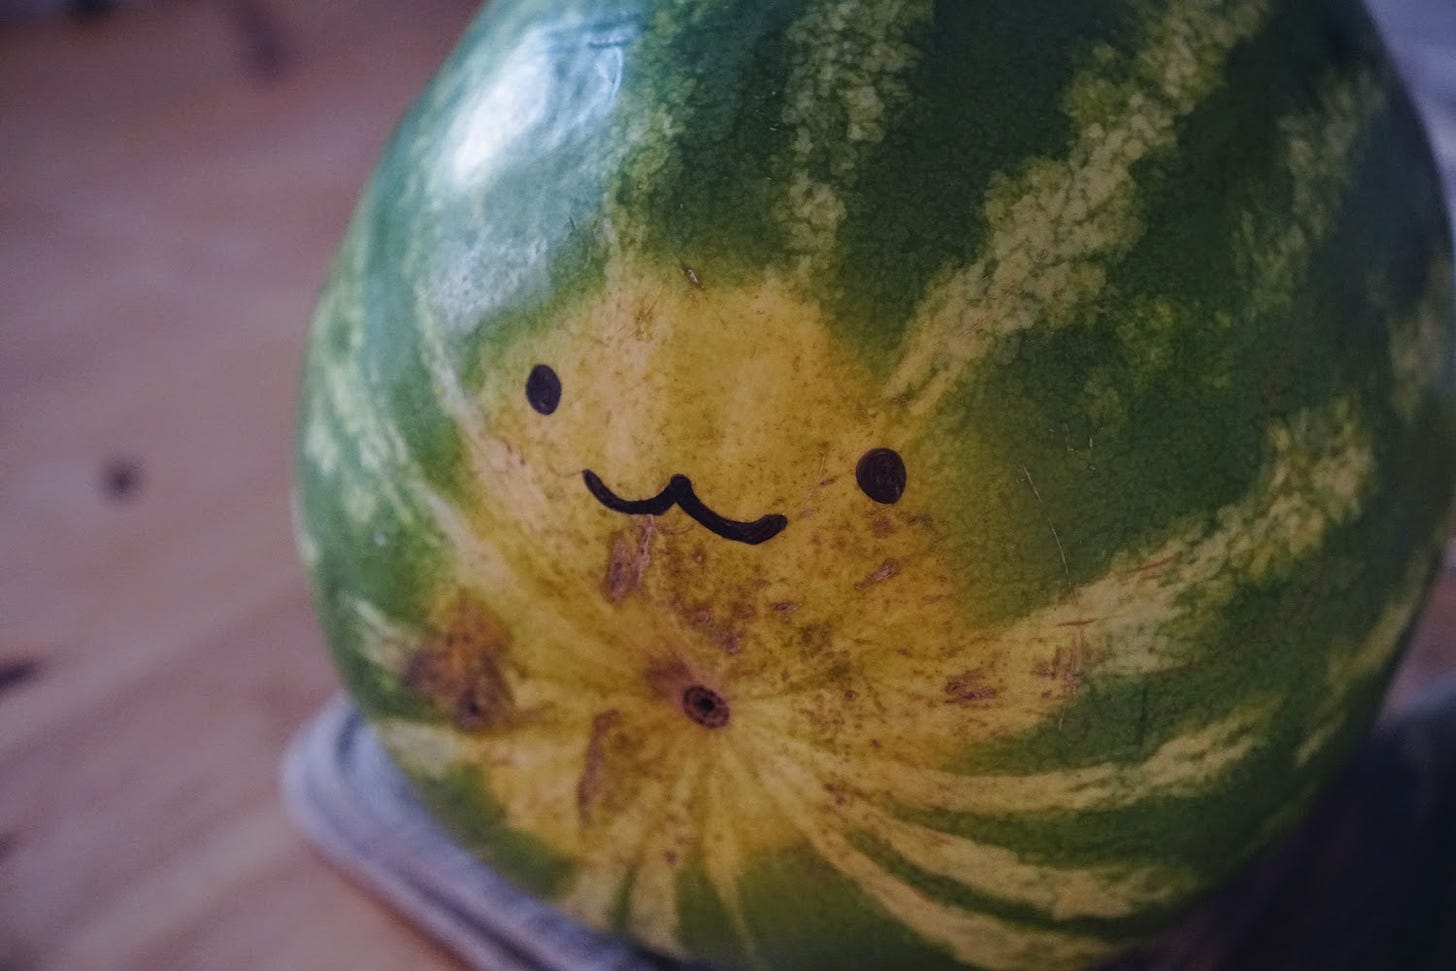 A watermelon with a face